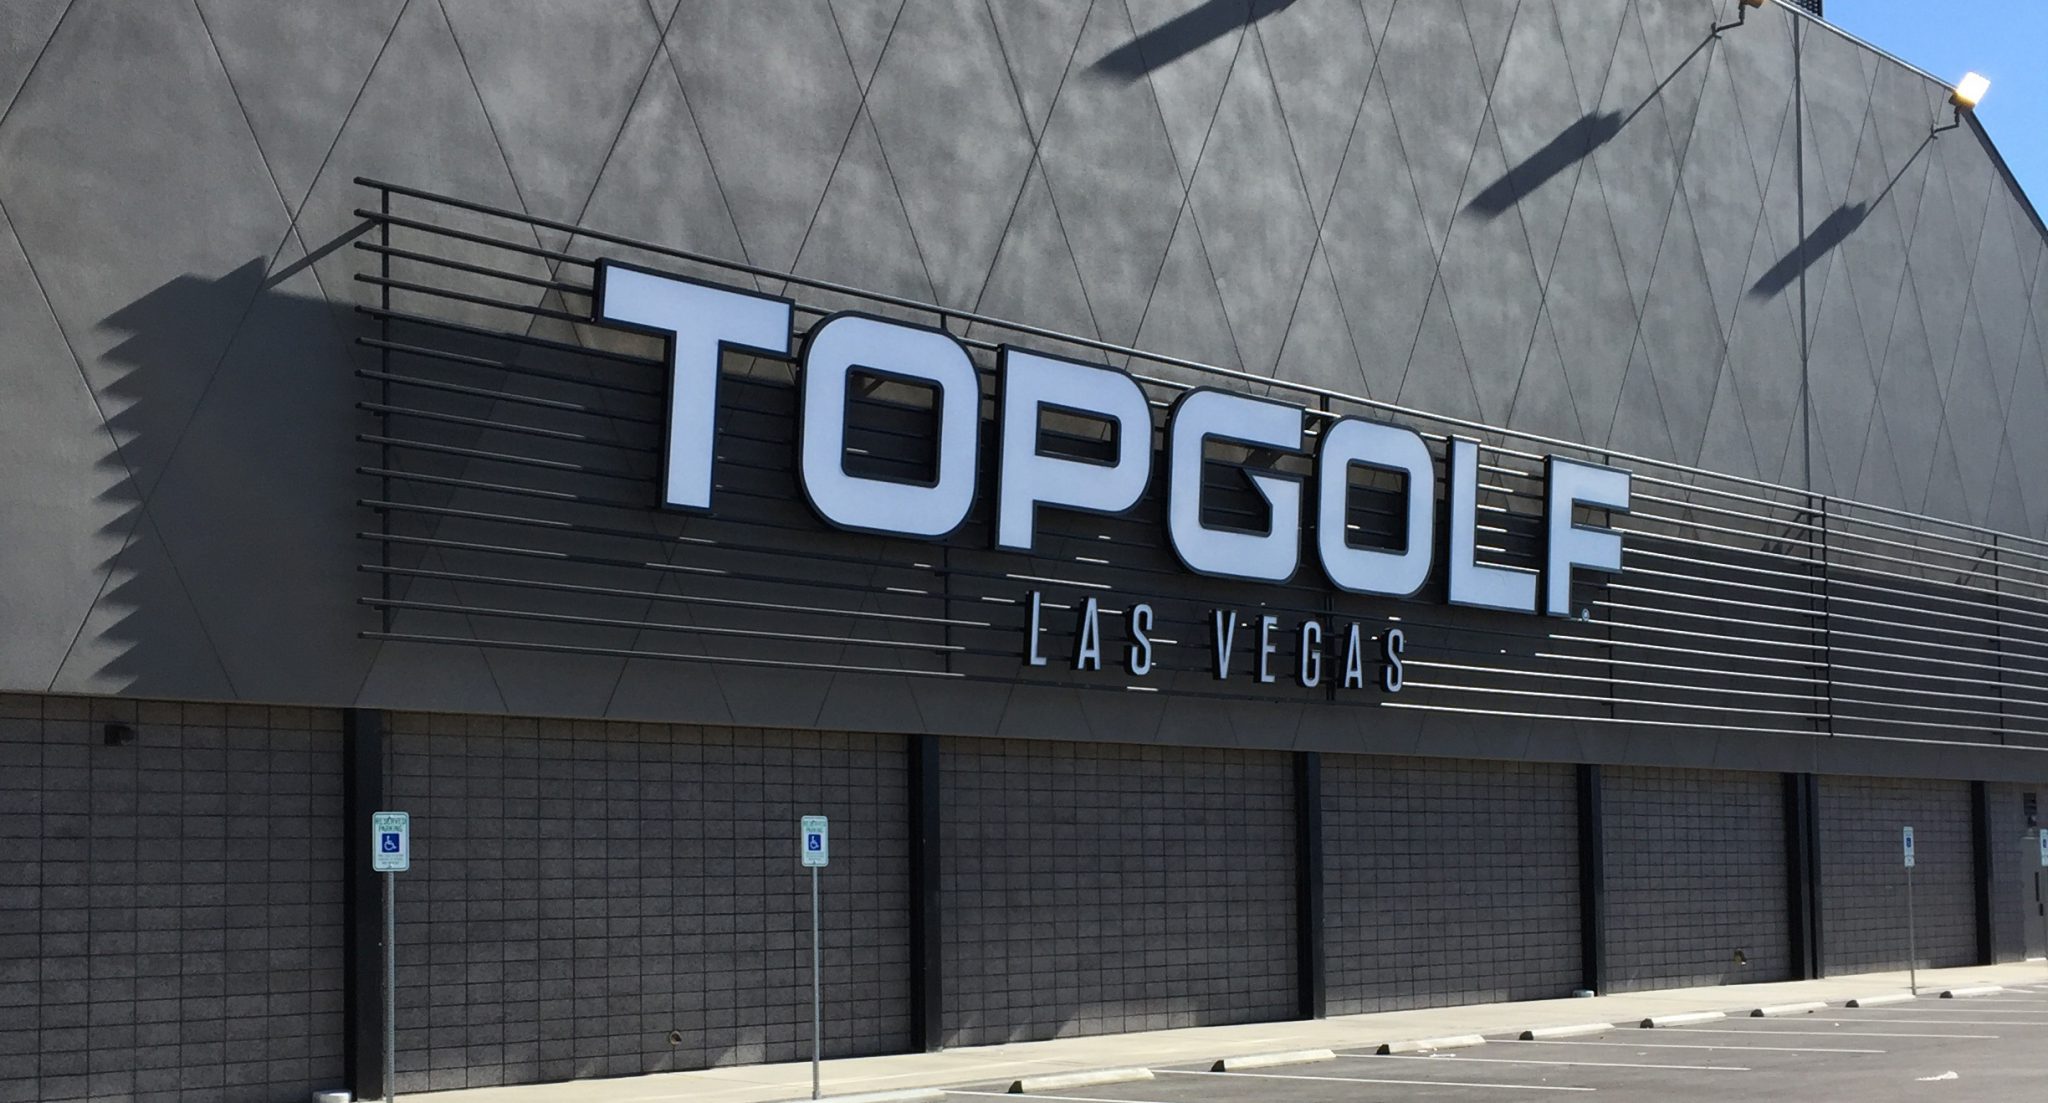 Topgolf Las Vegas Hits a Hole-in-One